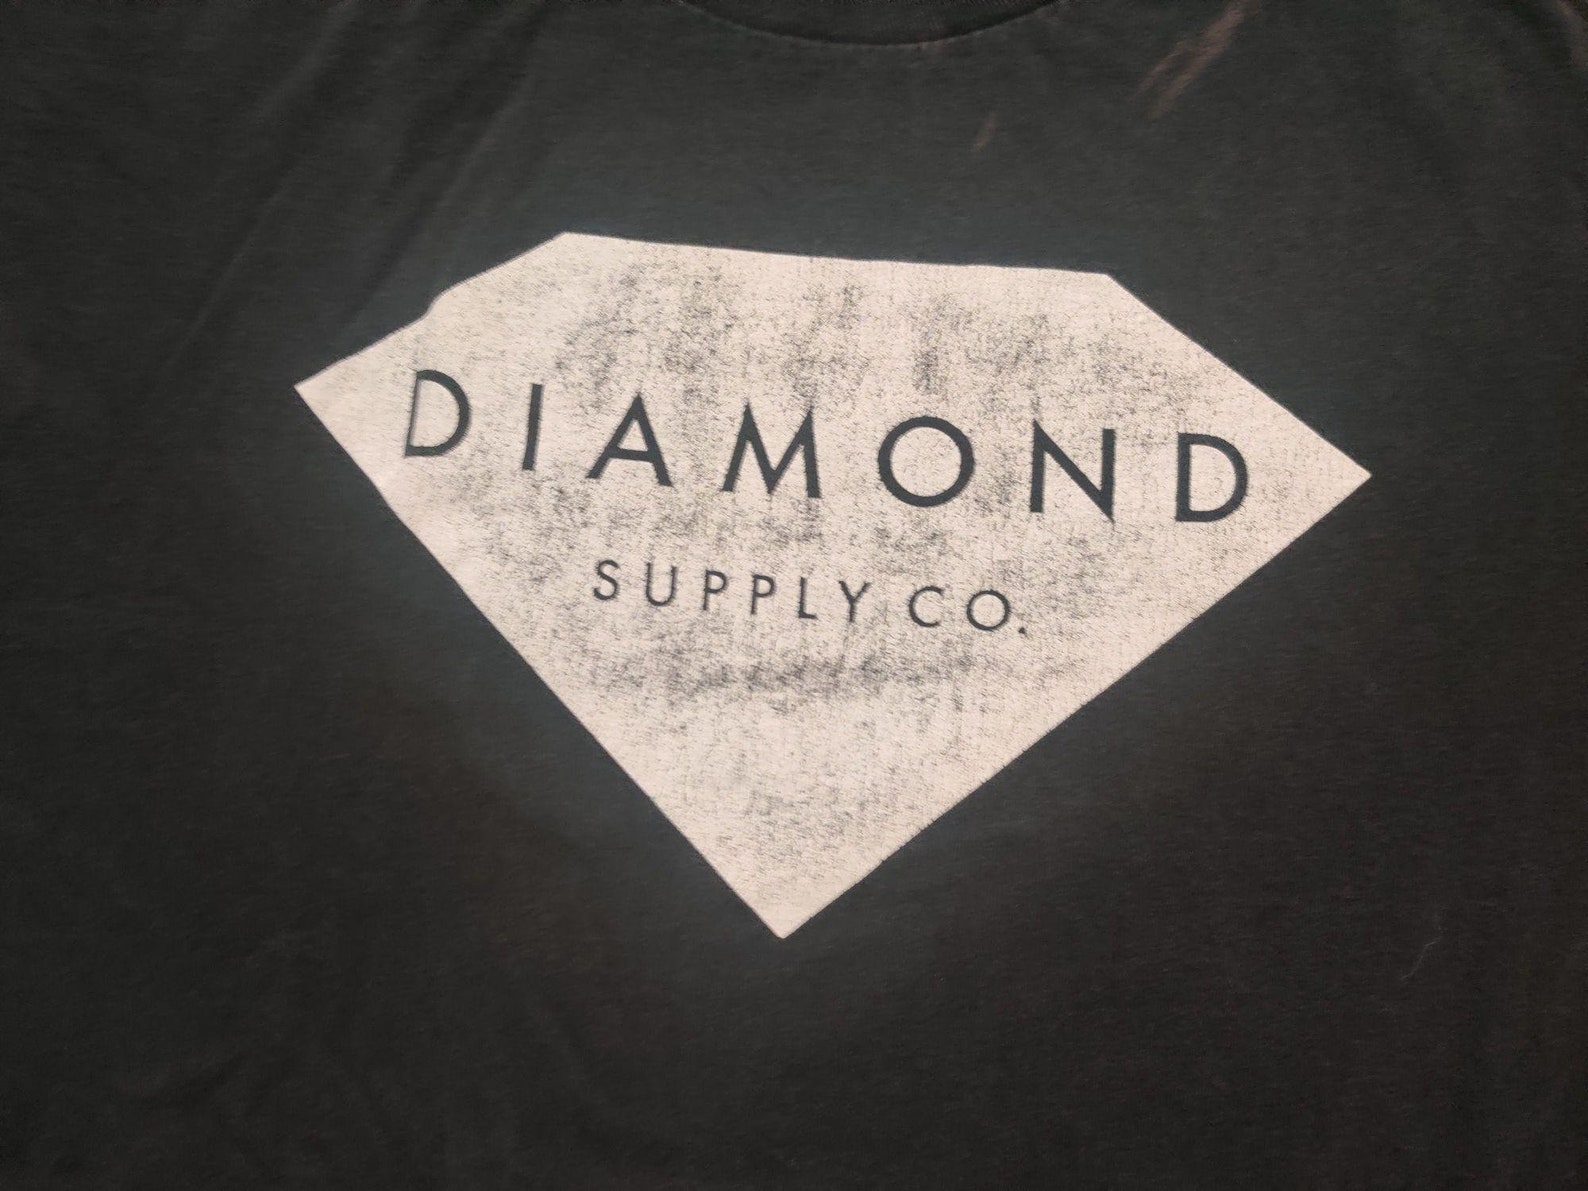 [100+] Diamond Supply Co Pictures | Wallpapers.com